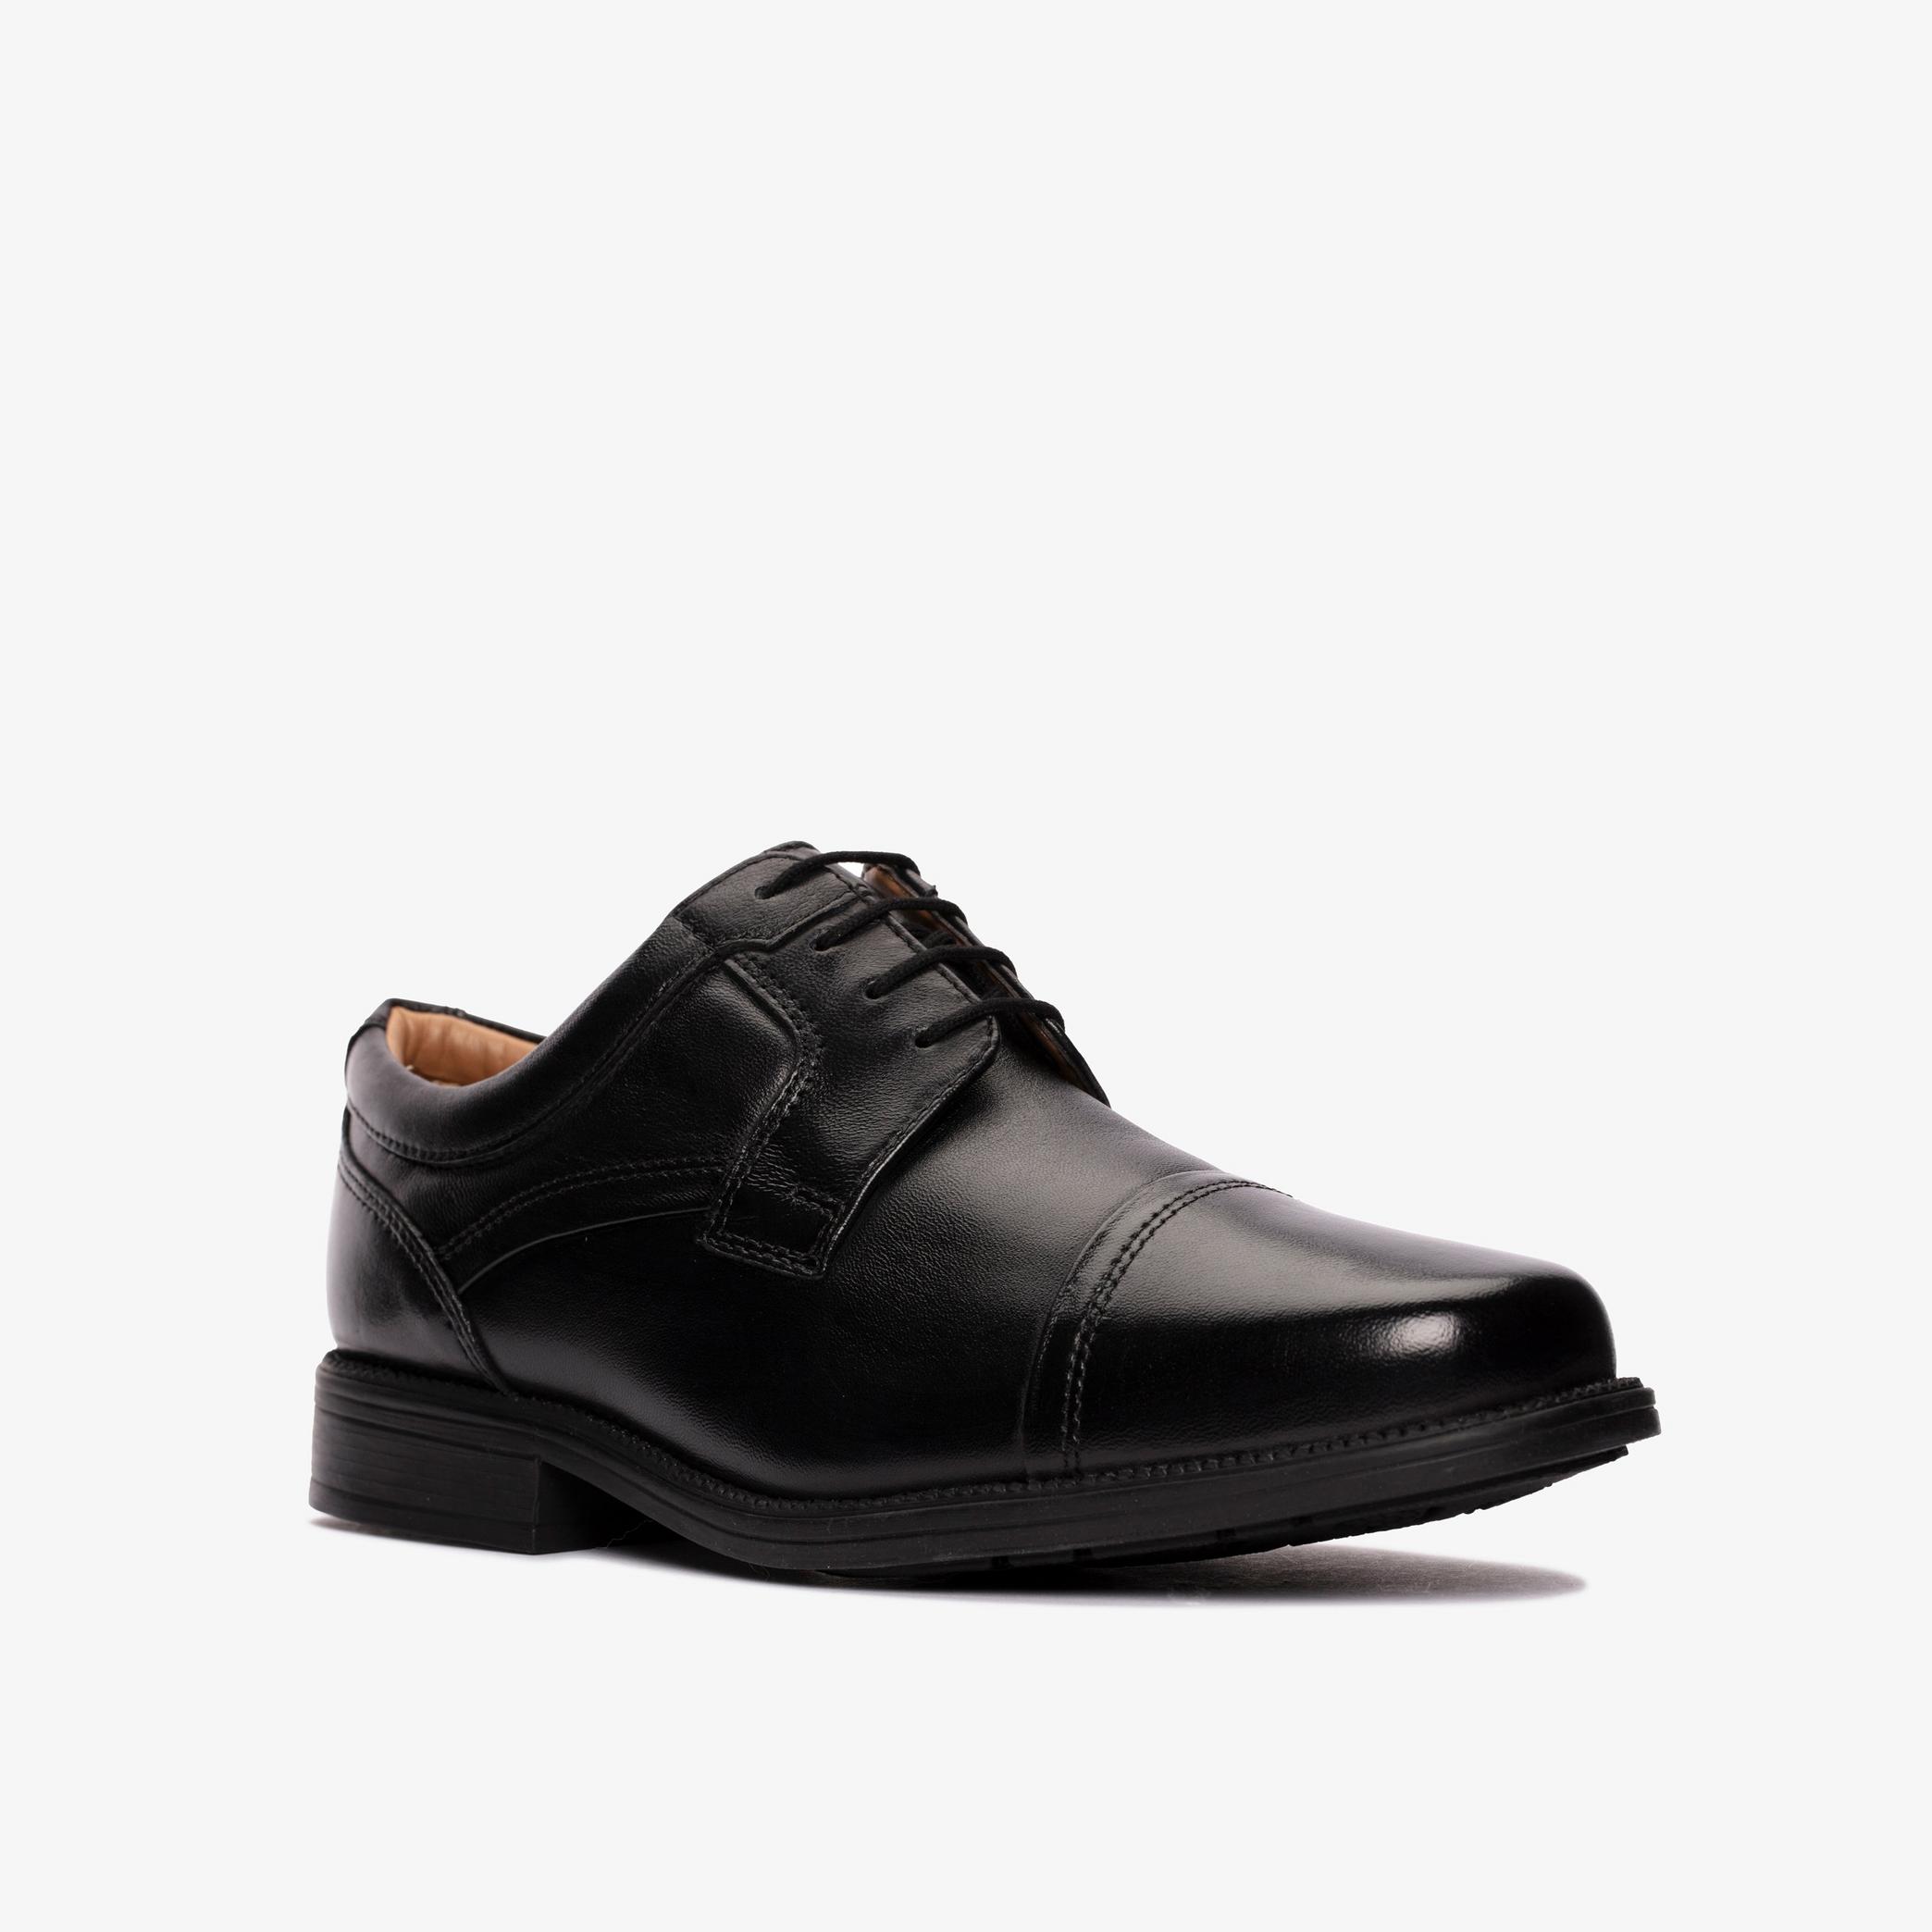 Hail Cap Black Leather Shoes, view 3 of 6